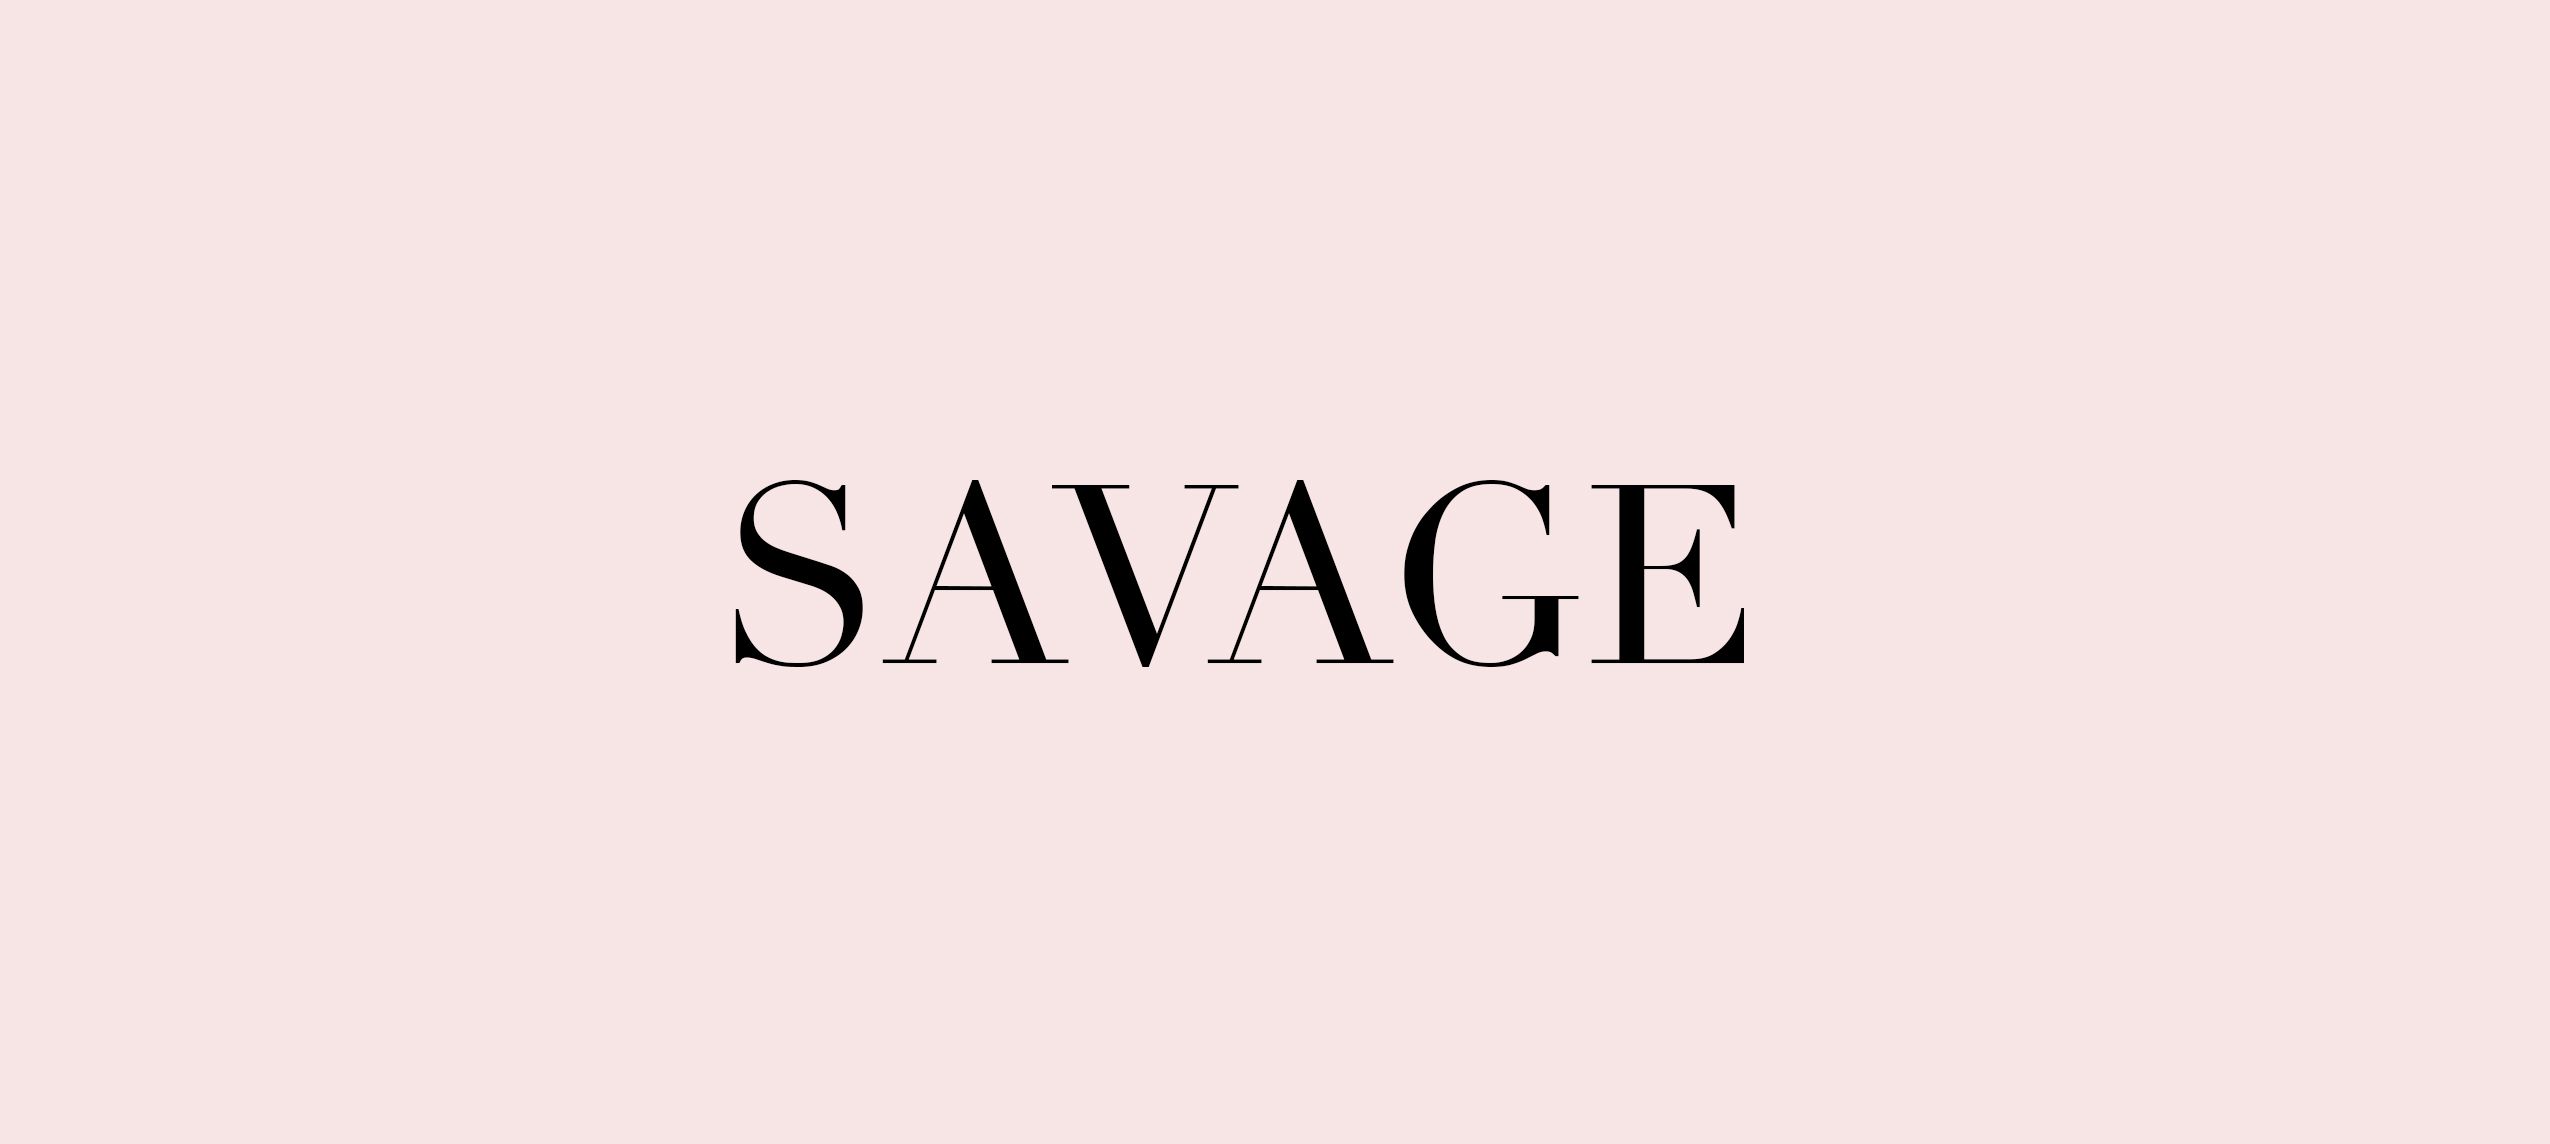 savage: my mood for 2017. Savage quotes, Sassy quotes, Queen quotes